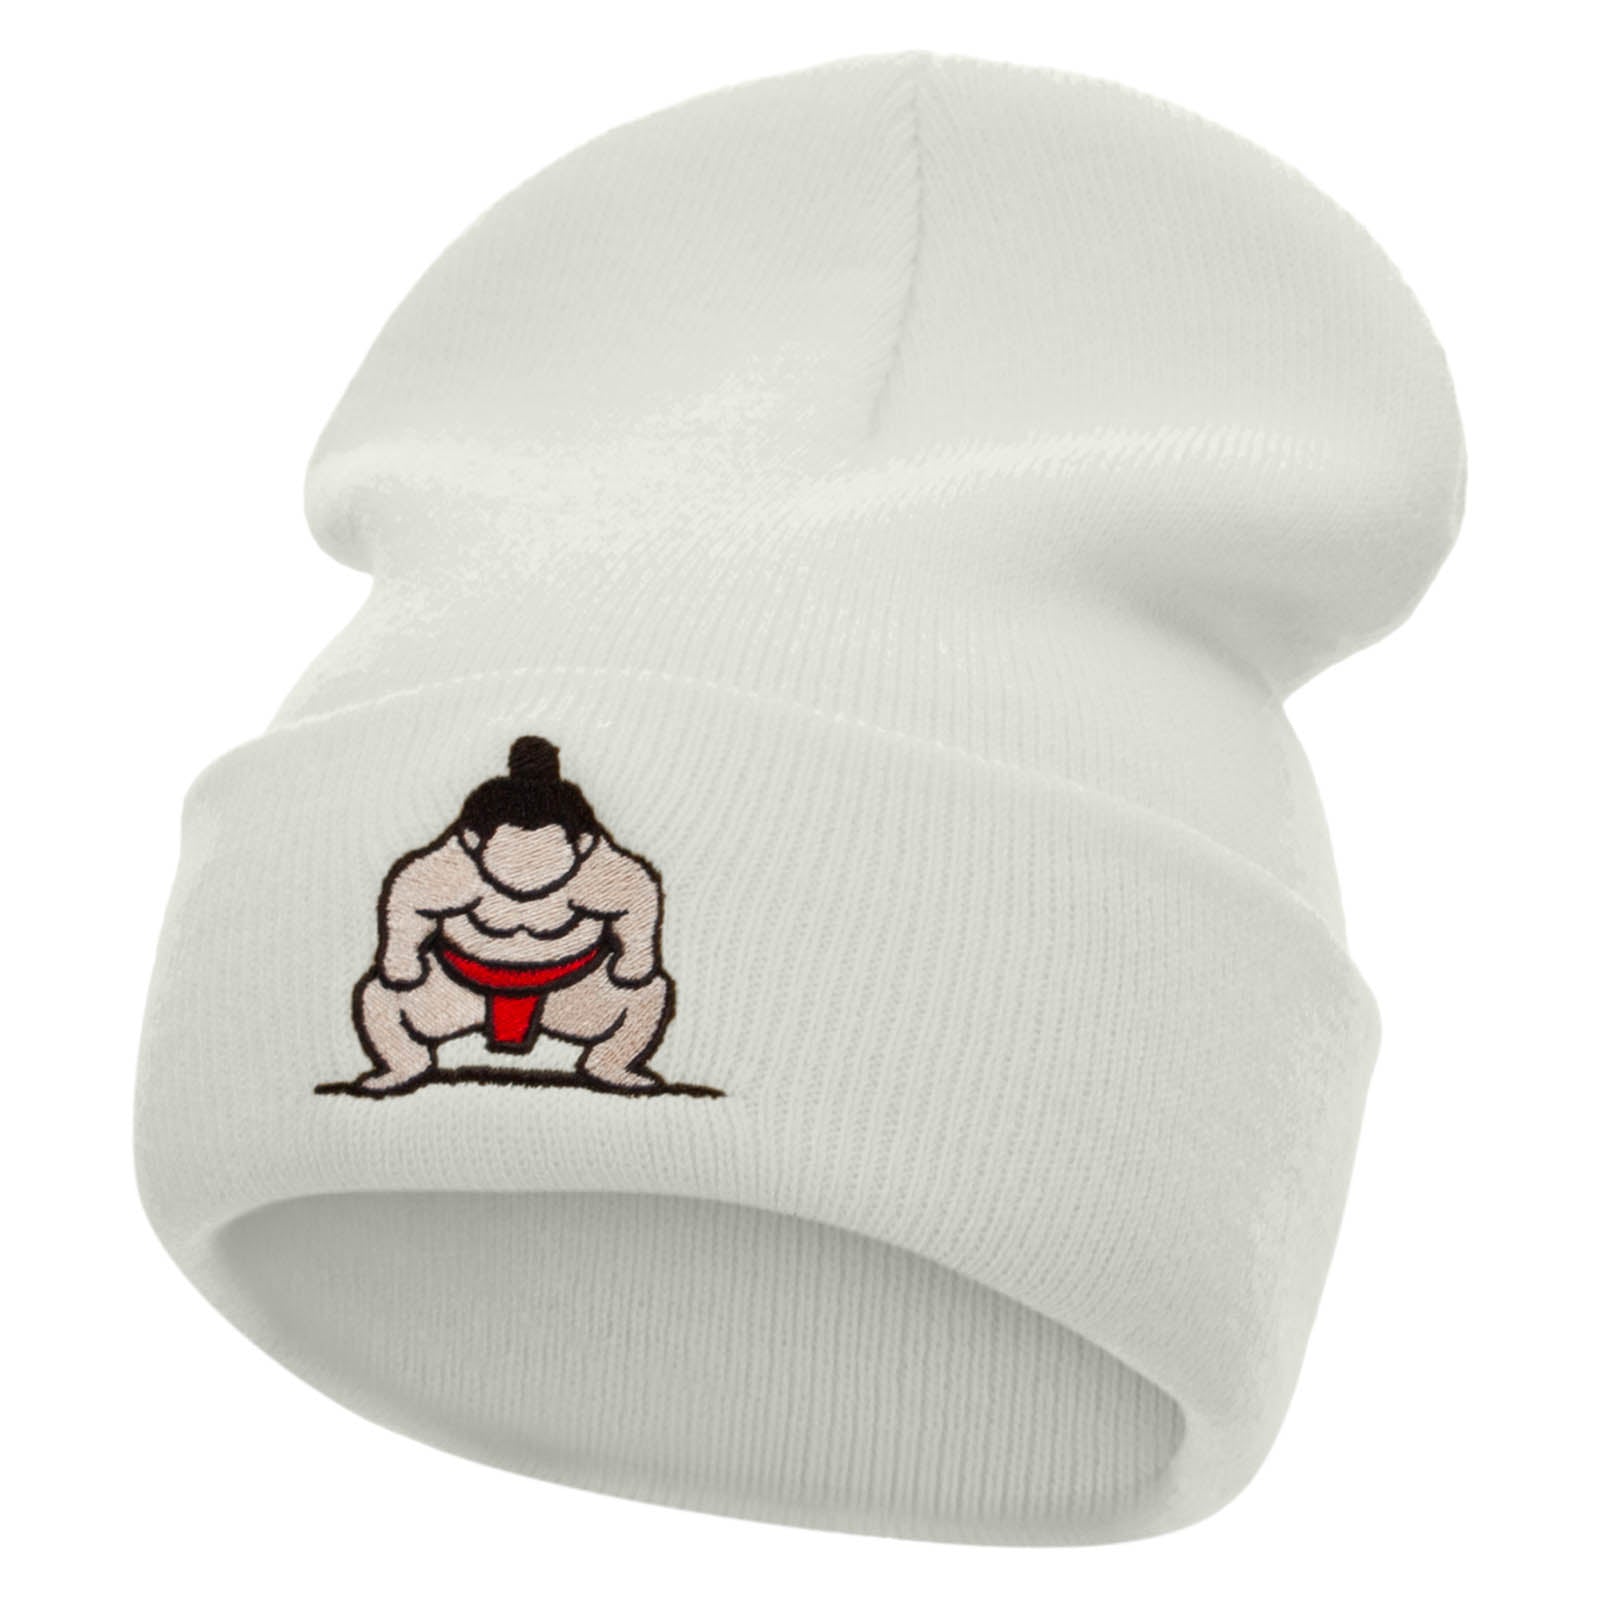 Sumo Embroidered 12 Inch Long Knitted Beanie - White OSFM